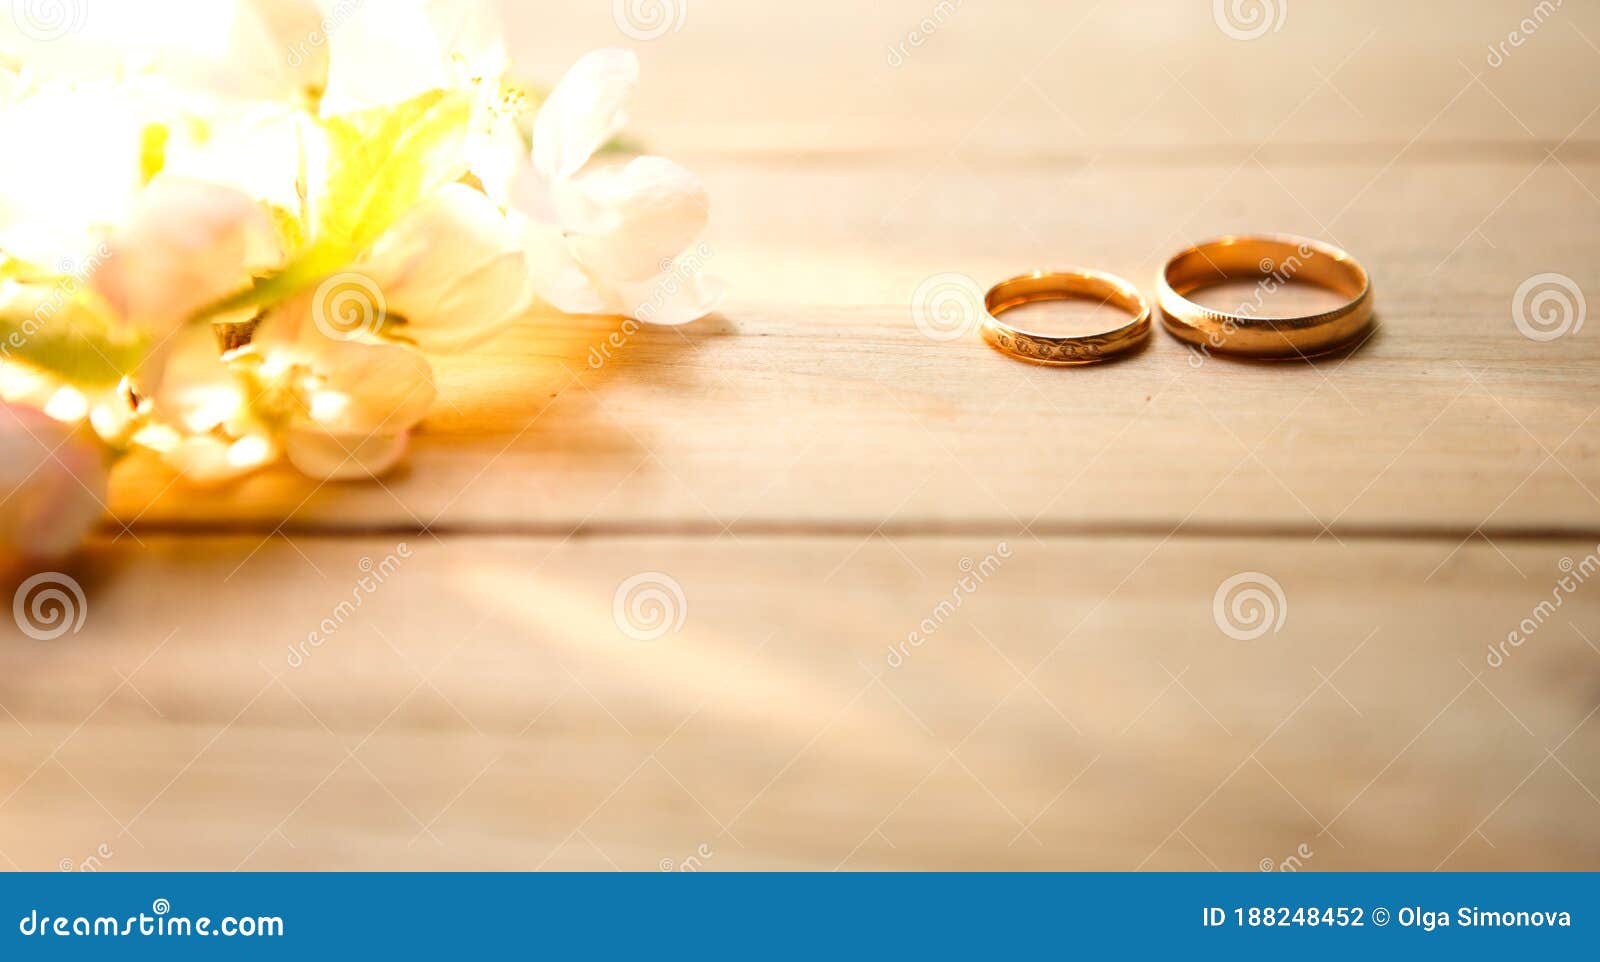 Two Gold Rings on a Wooden Background with White Apple Blossoms ...